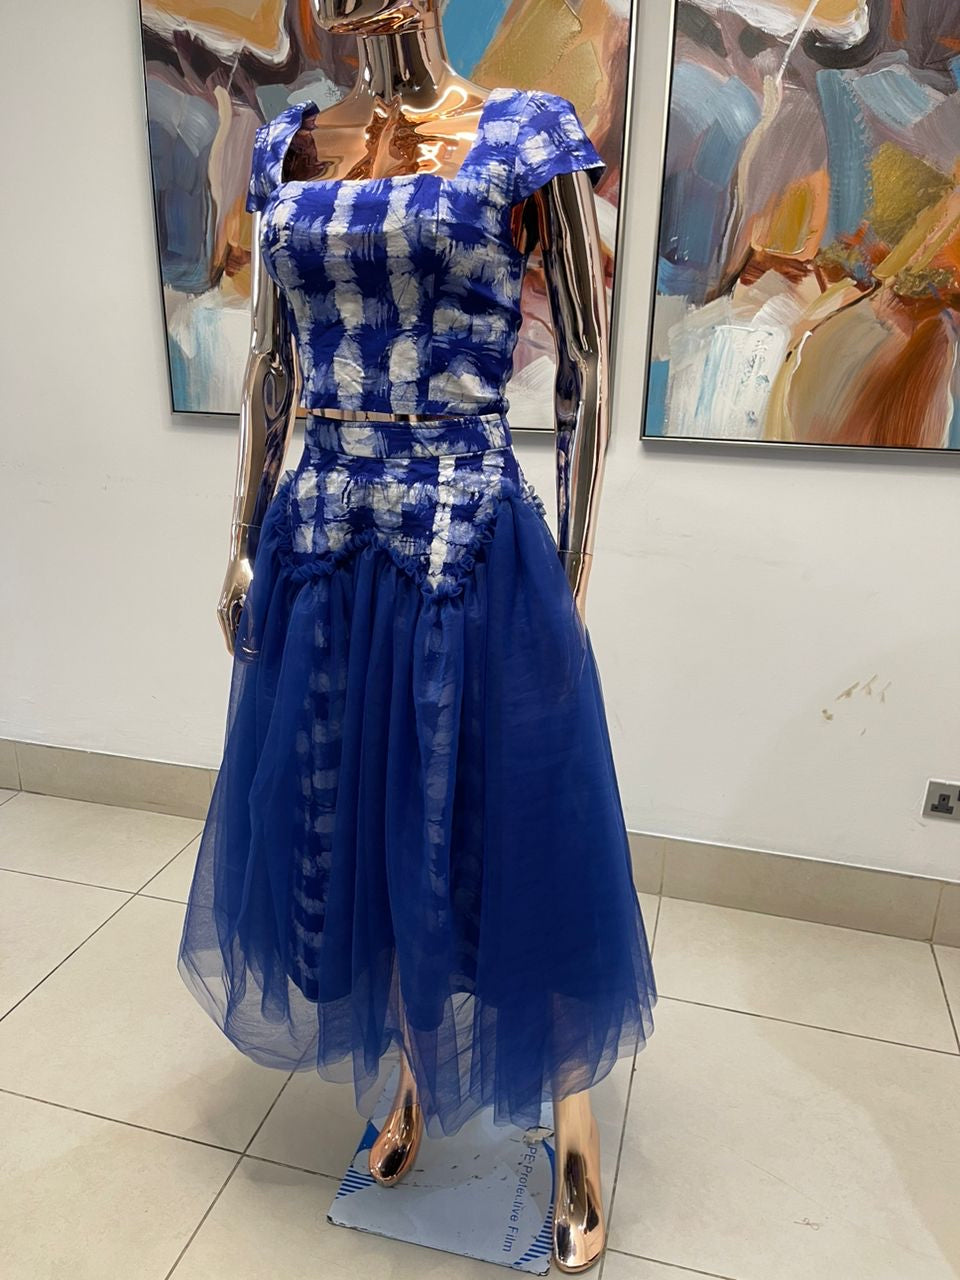 Sheila Bonsu Atelier: Exquisite Ghanaian Batik and Tulle Skirts and Sets